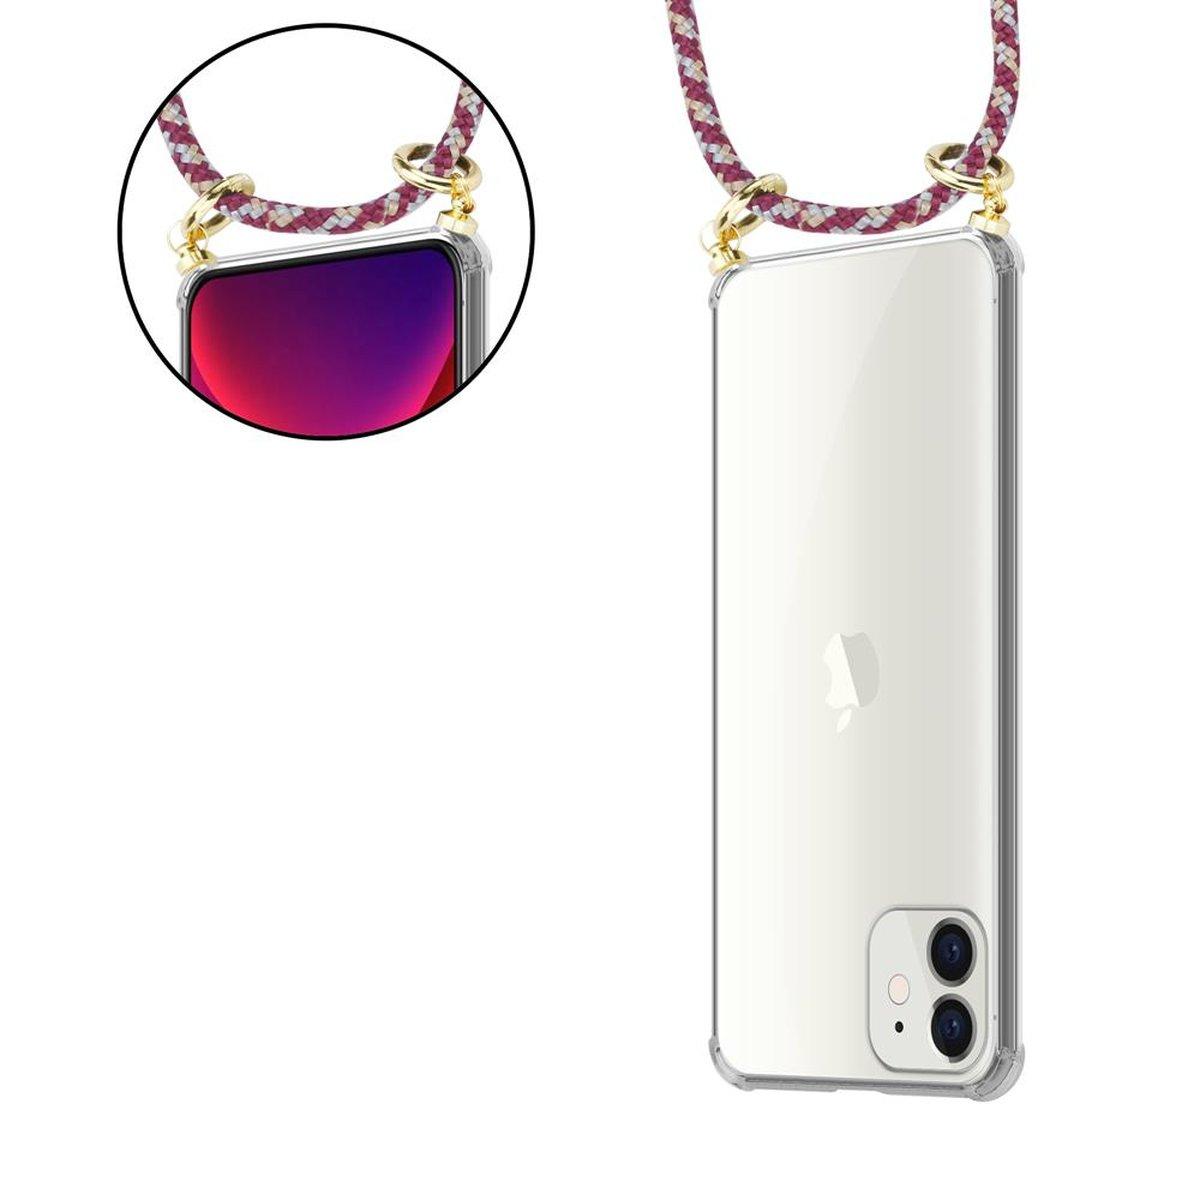 Hülle, abnehmbarer Handy Apple, MINI, Kordel Band ROT Gold iPhone GELB und mit Backcover, Ringen, 12 Kette CADORABO WEIß